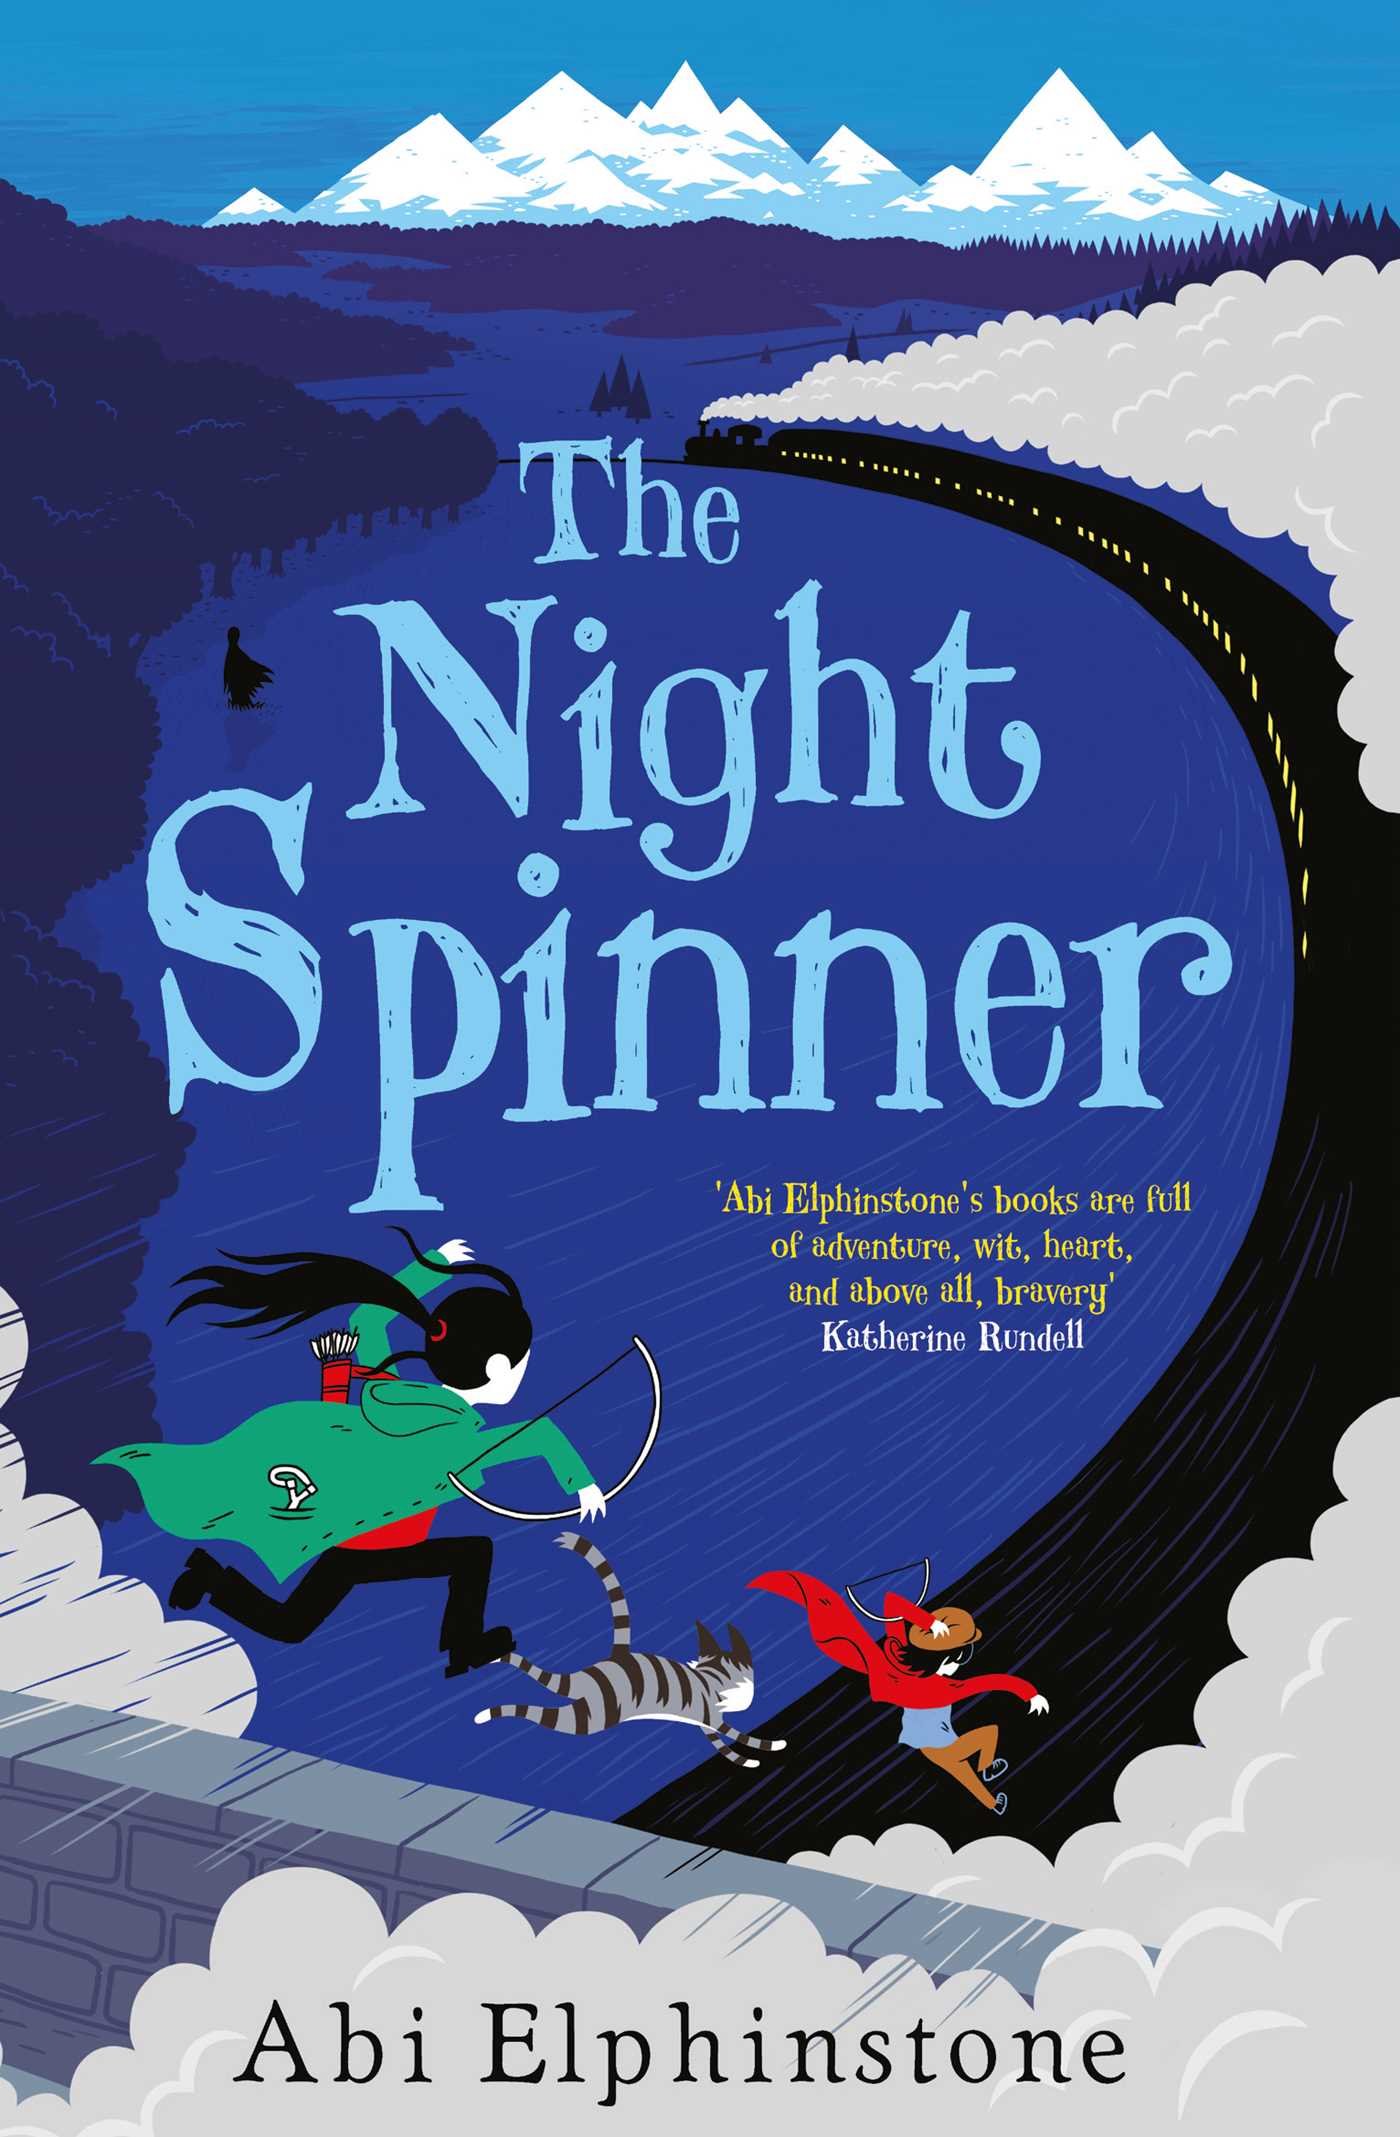 The Dreamsnatcher Book 3: The Night Spinner | Abi Elphinstone